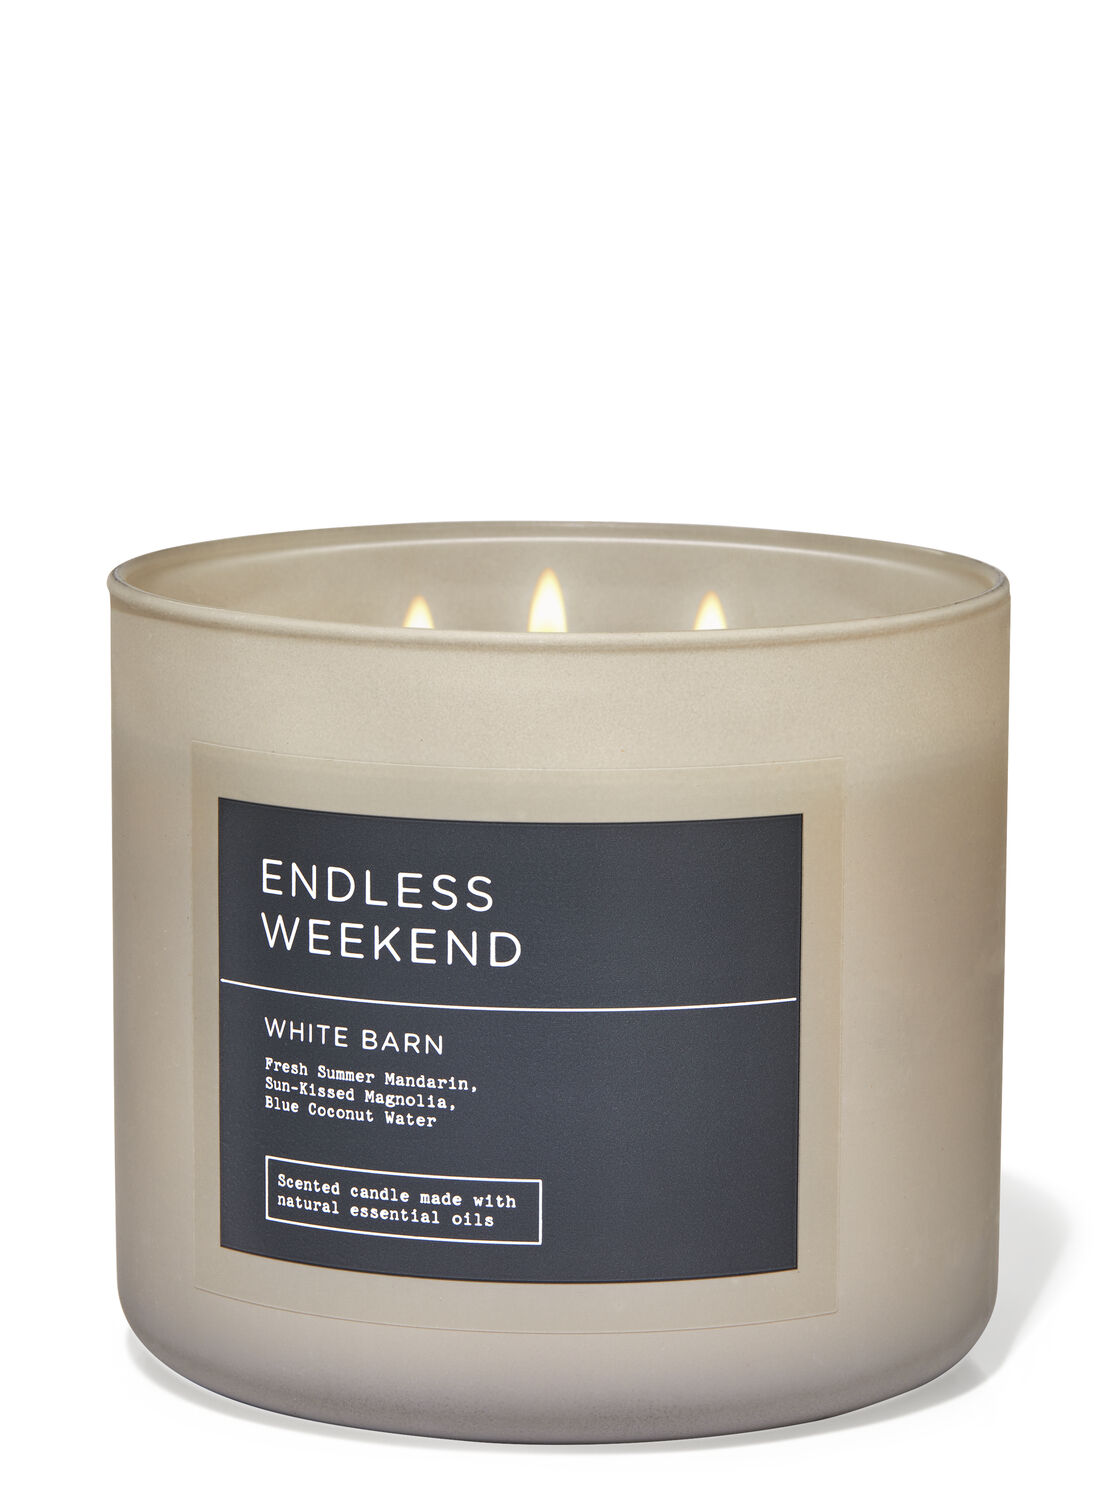 BATH BODY WORKS MOM YOU'RE AMAZING ENDLESS WEEKEND SCENTED CANDLE 3 WICK LARGE 